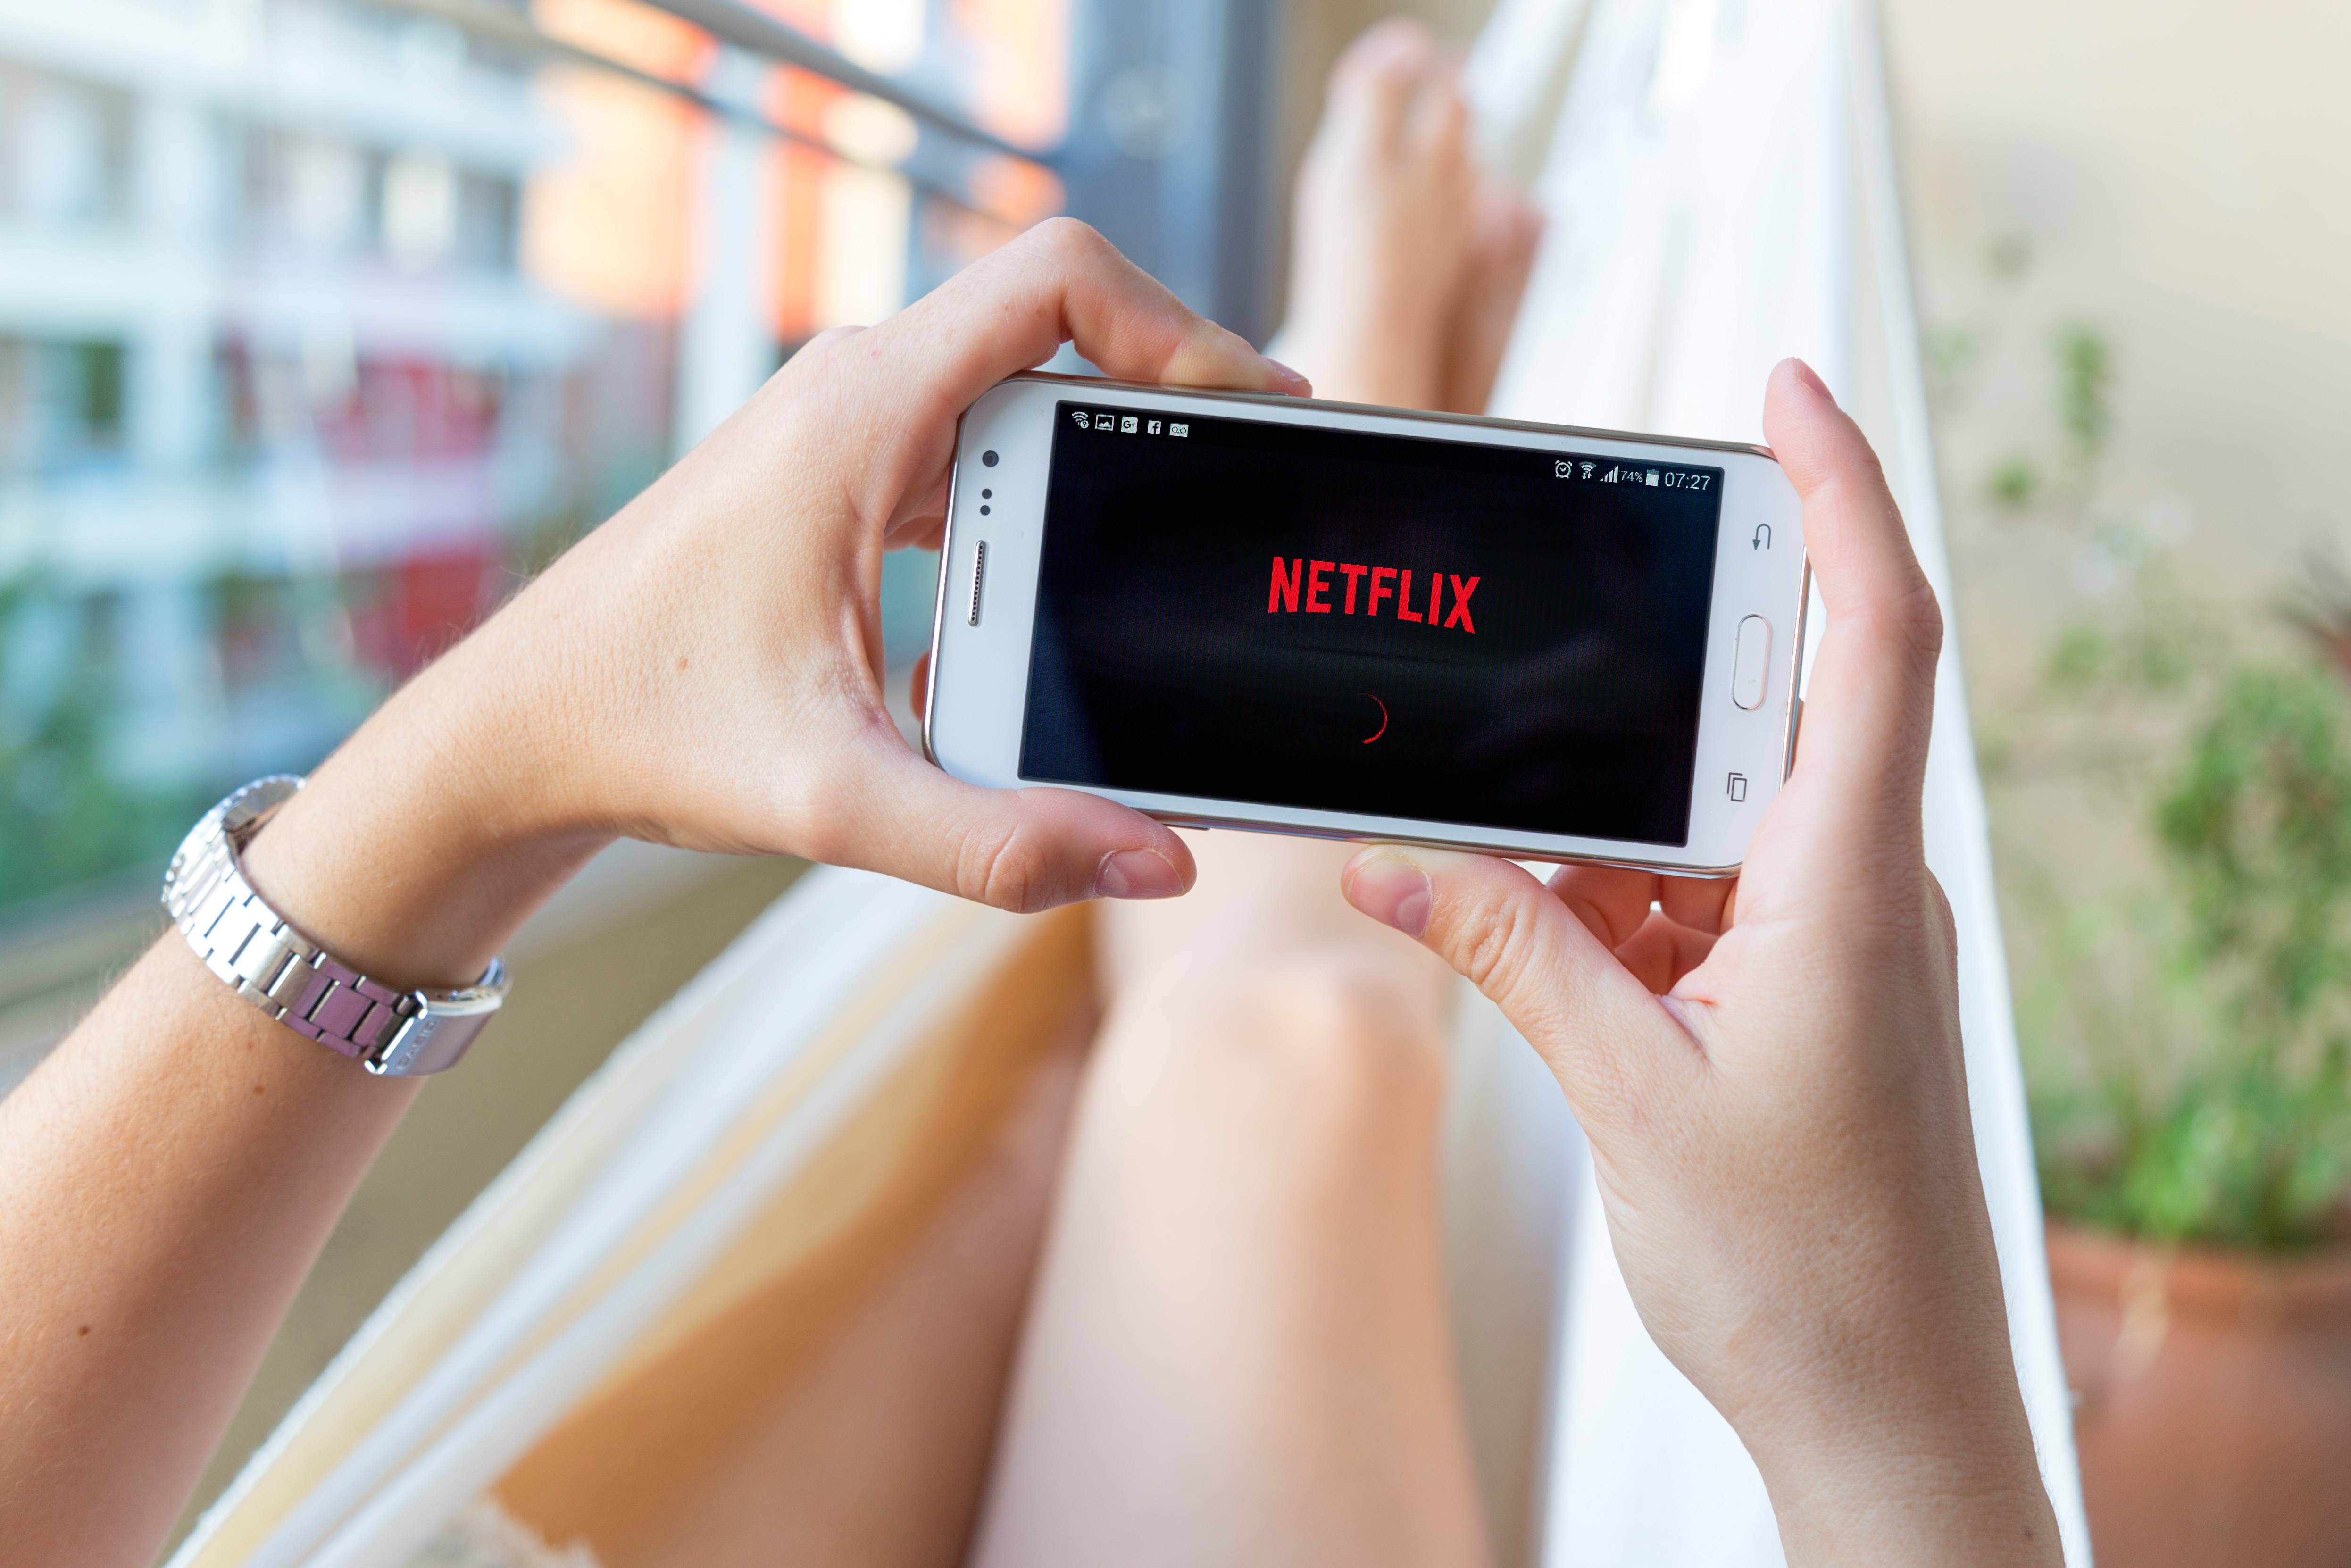 Netflix Will Charge Viewers in This State More Starting This Month